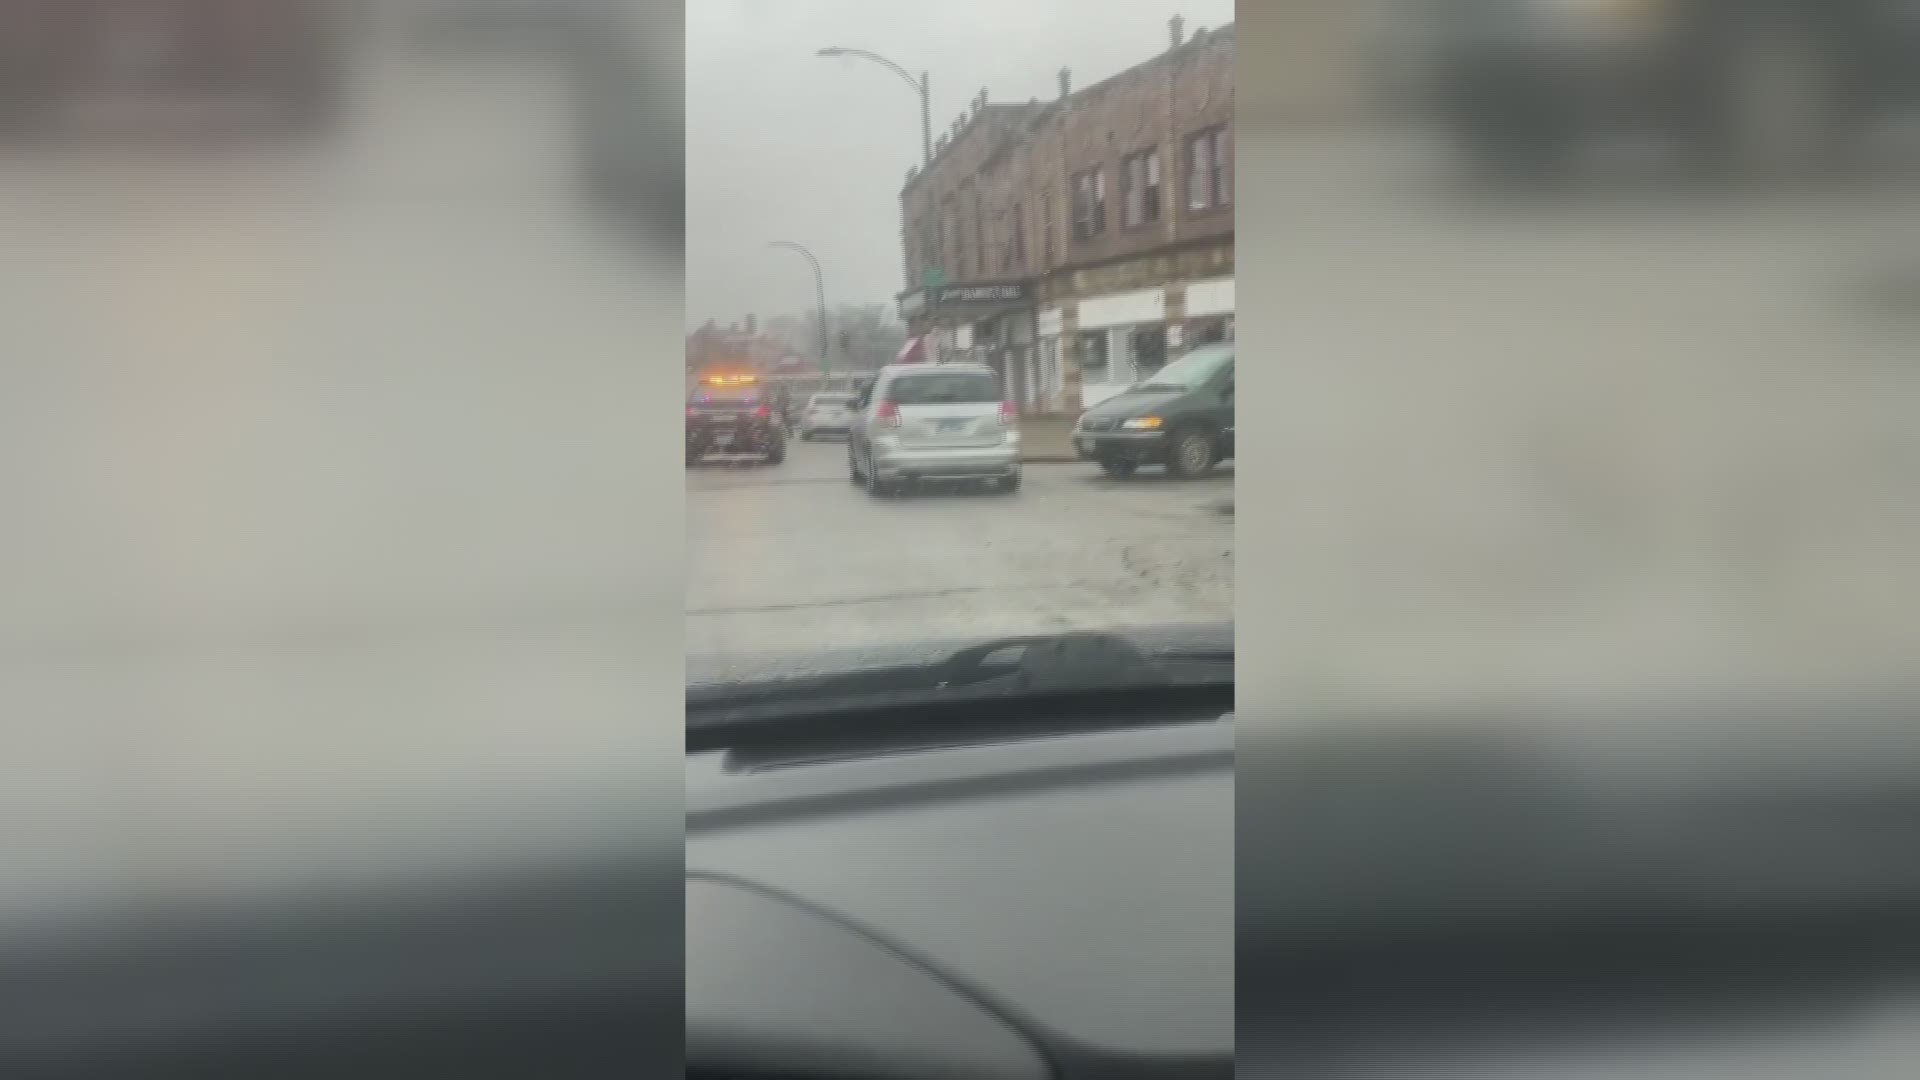 One man was injured after police officers shot him, St. Louis County police confirmed Tuesday afternoon. Cell phone video courtesy Roland Garner.